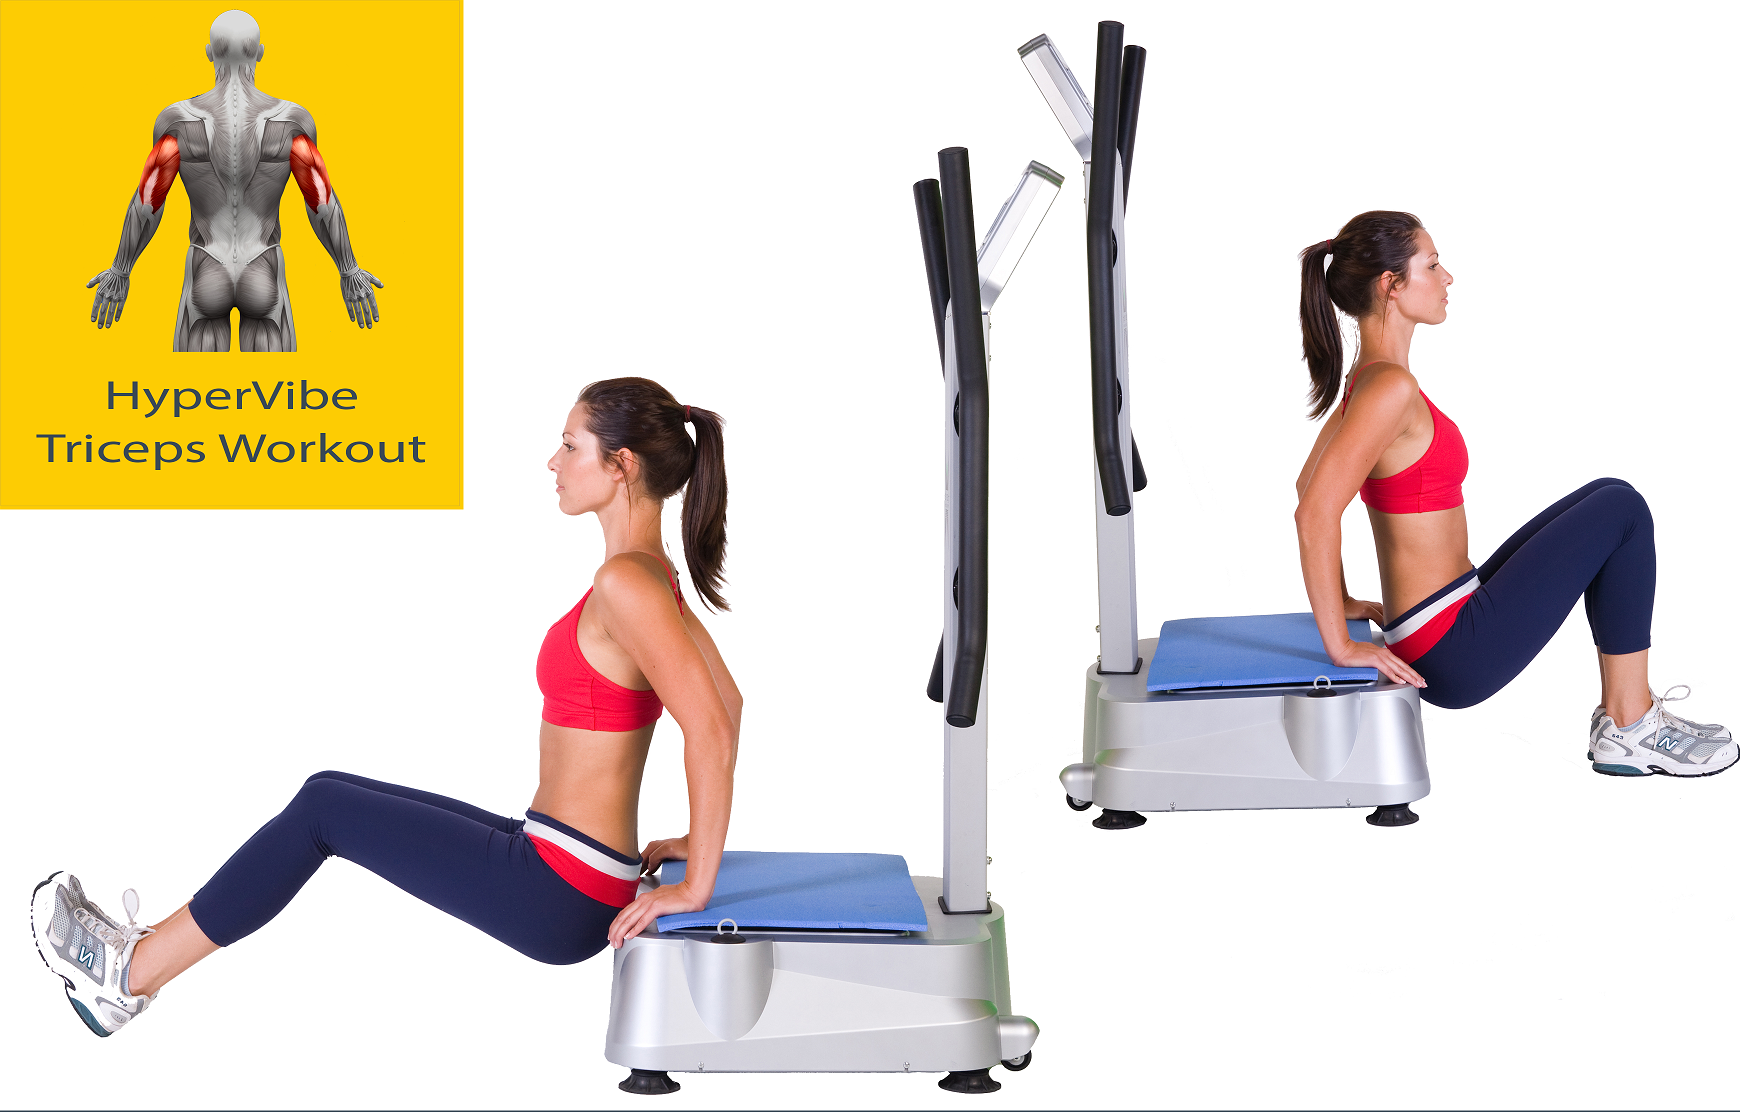 Whole Body Vibration Training Replaces Strength Workouts